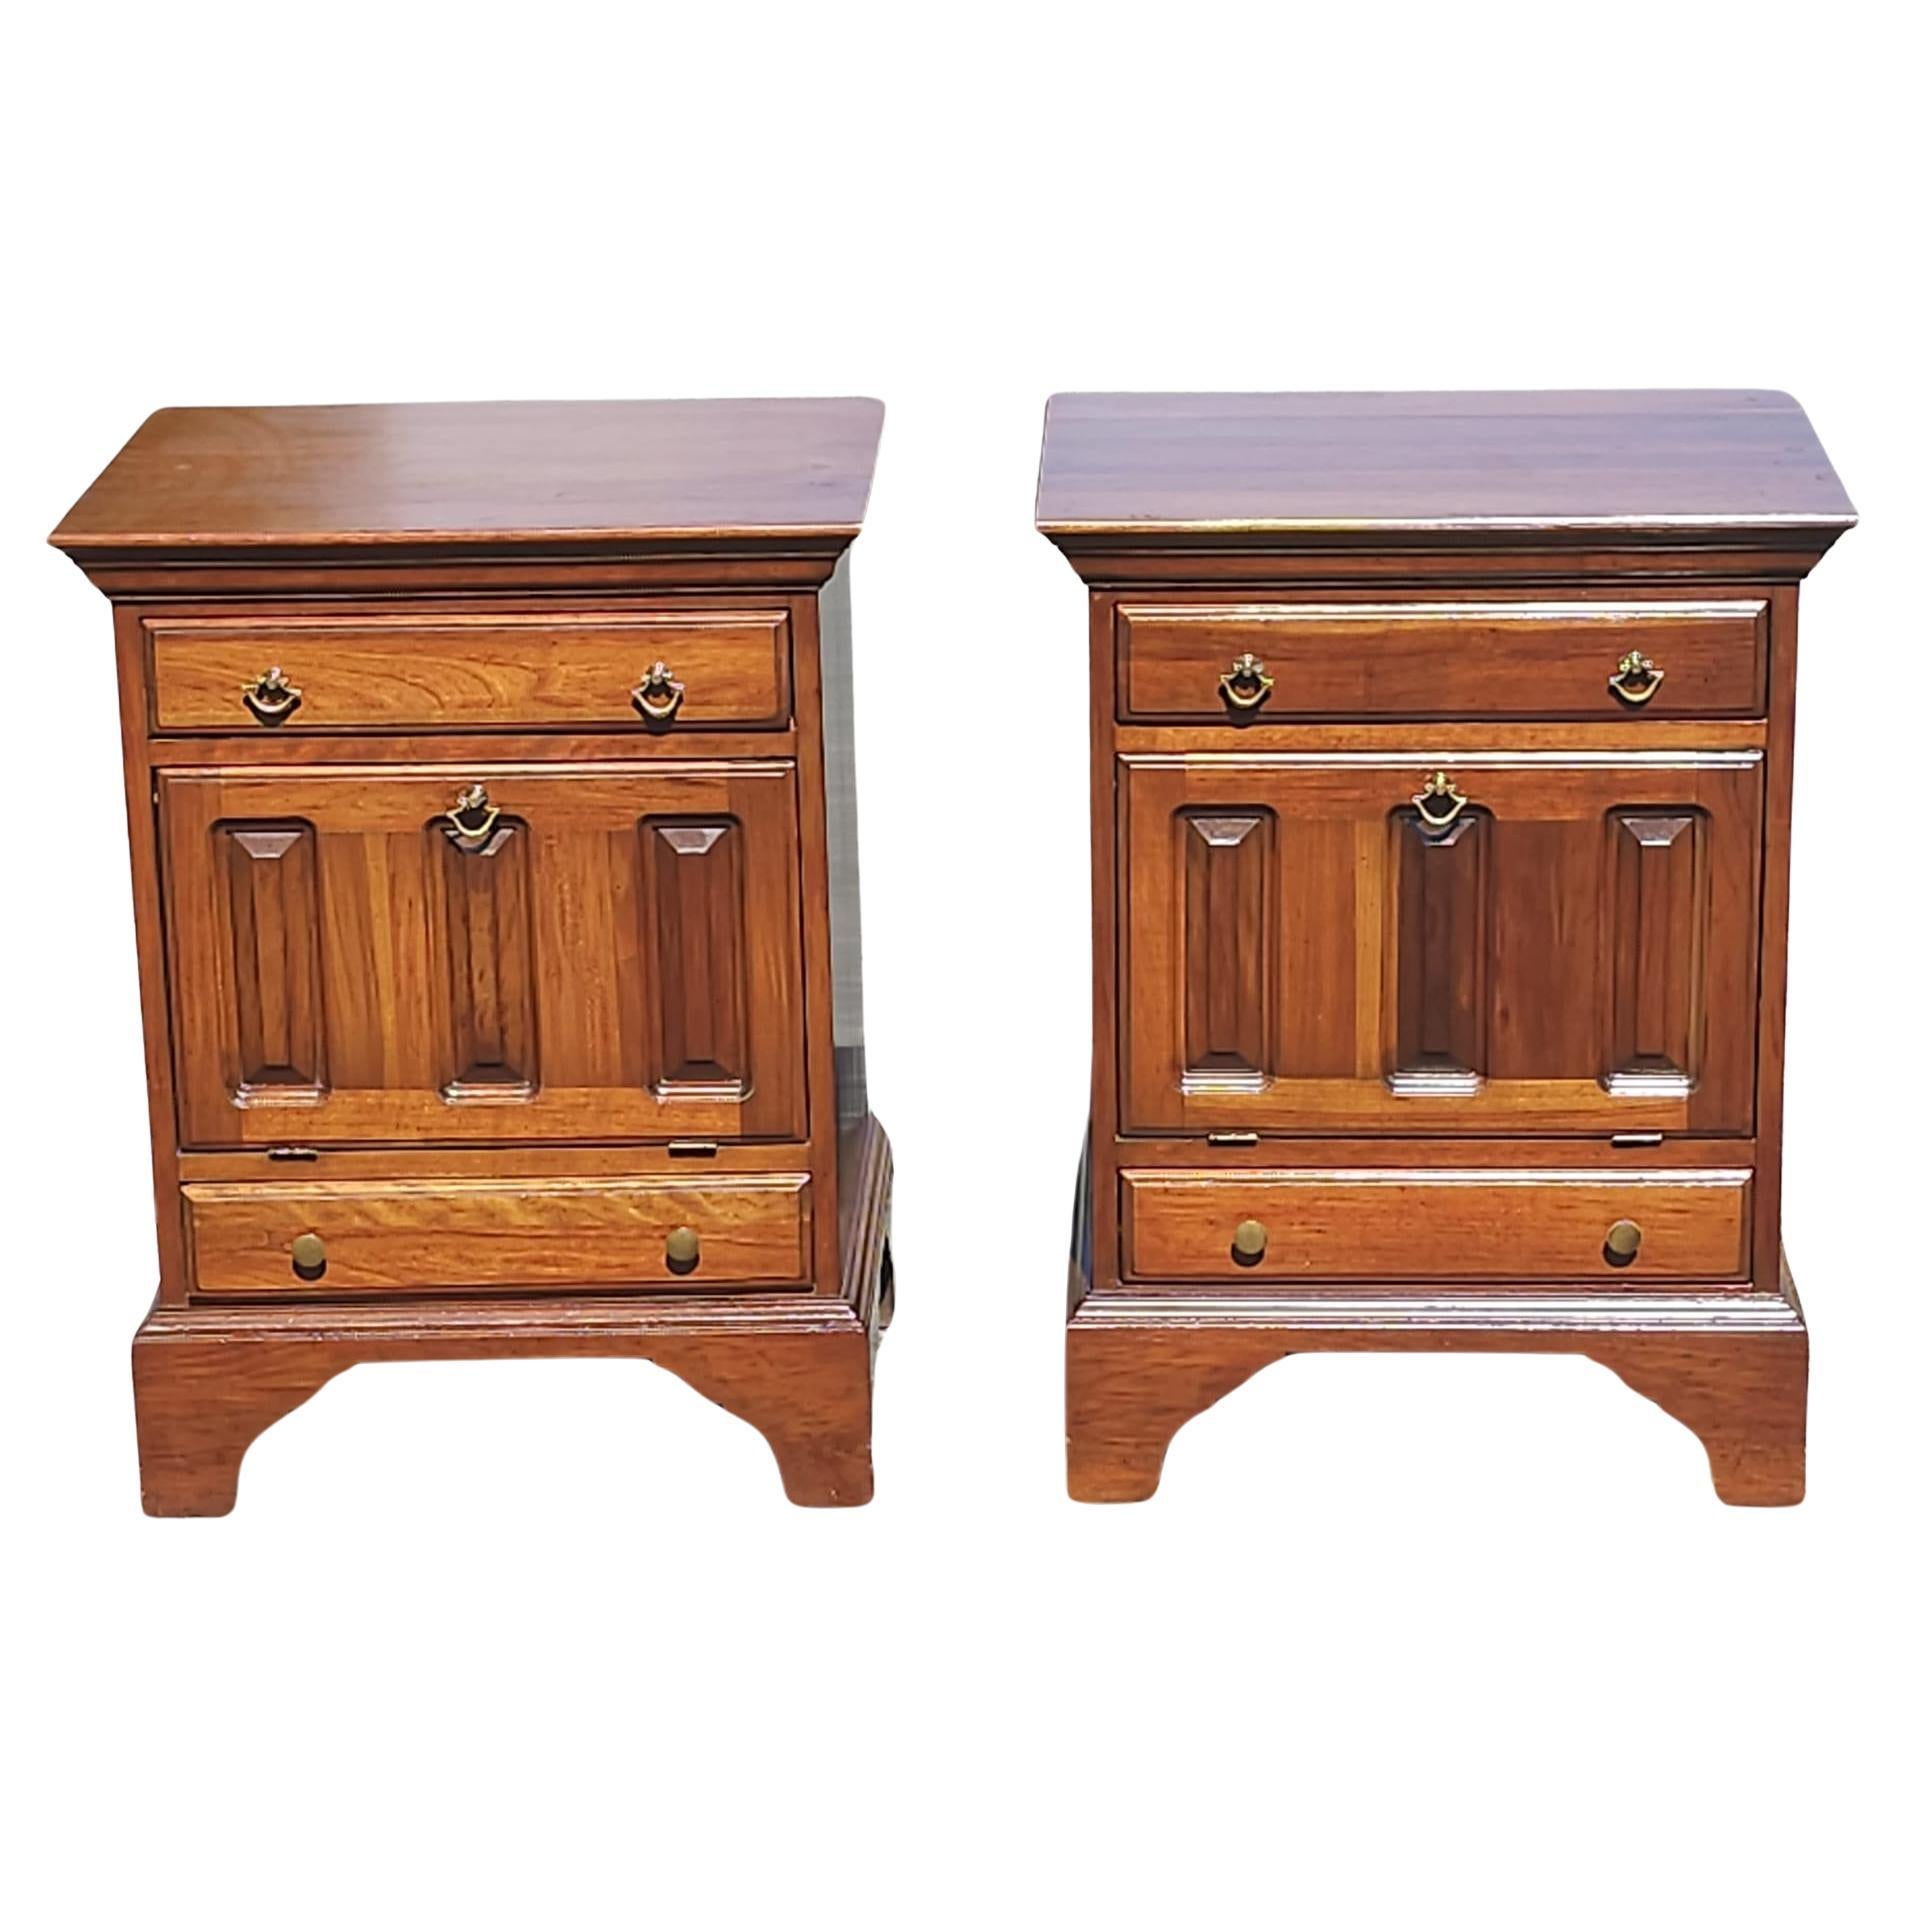 A pair of 20th Century David Cabinet Cherry 2-Drawer a Abattant Door Bedside Cabinets / Nightstands with Protective glass tops. Feature a top drawer, a large storage cabinet with a drop down door and bottom drawer. Both drawer with dovetail joints